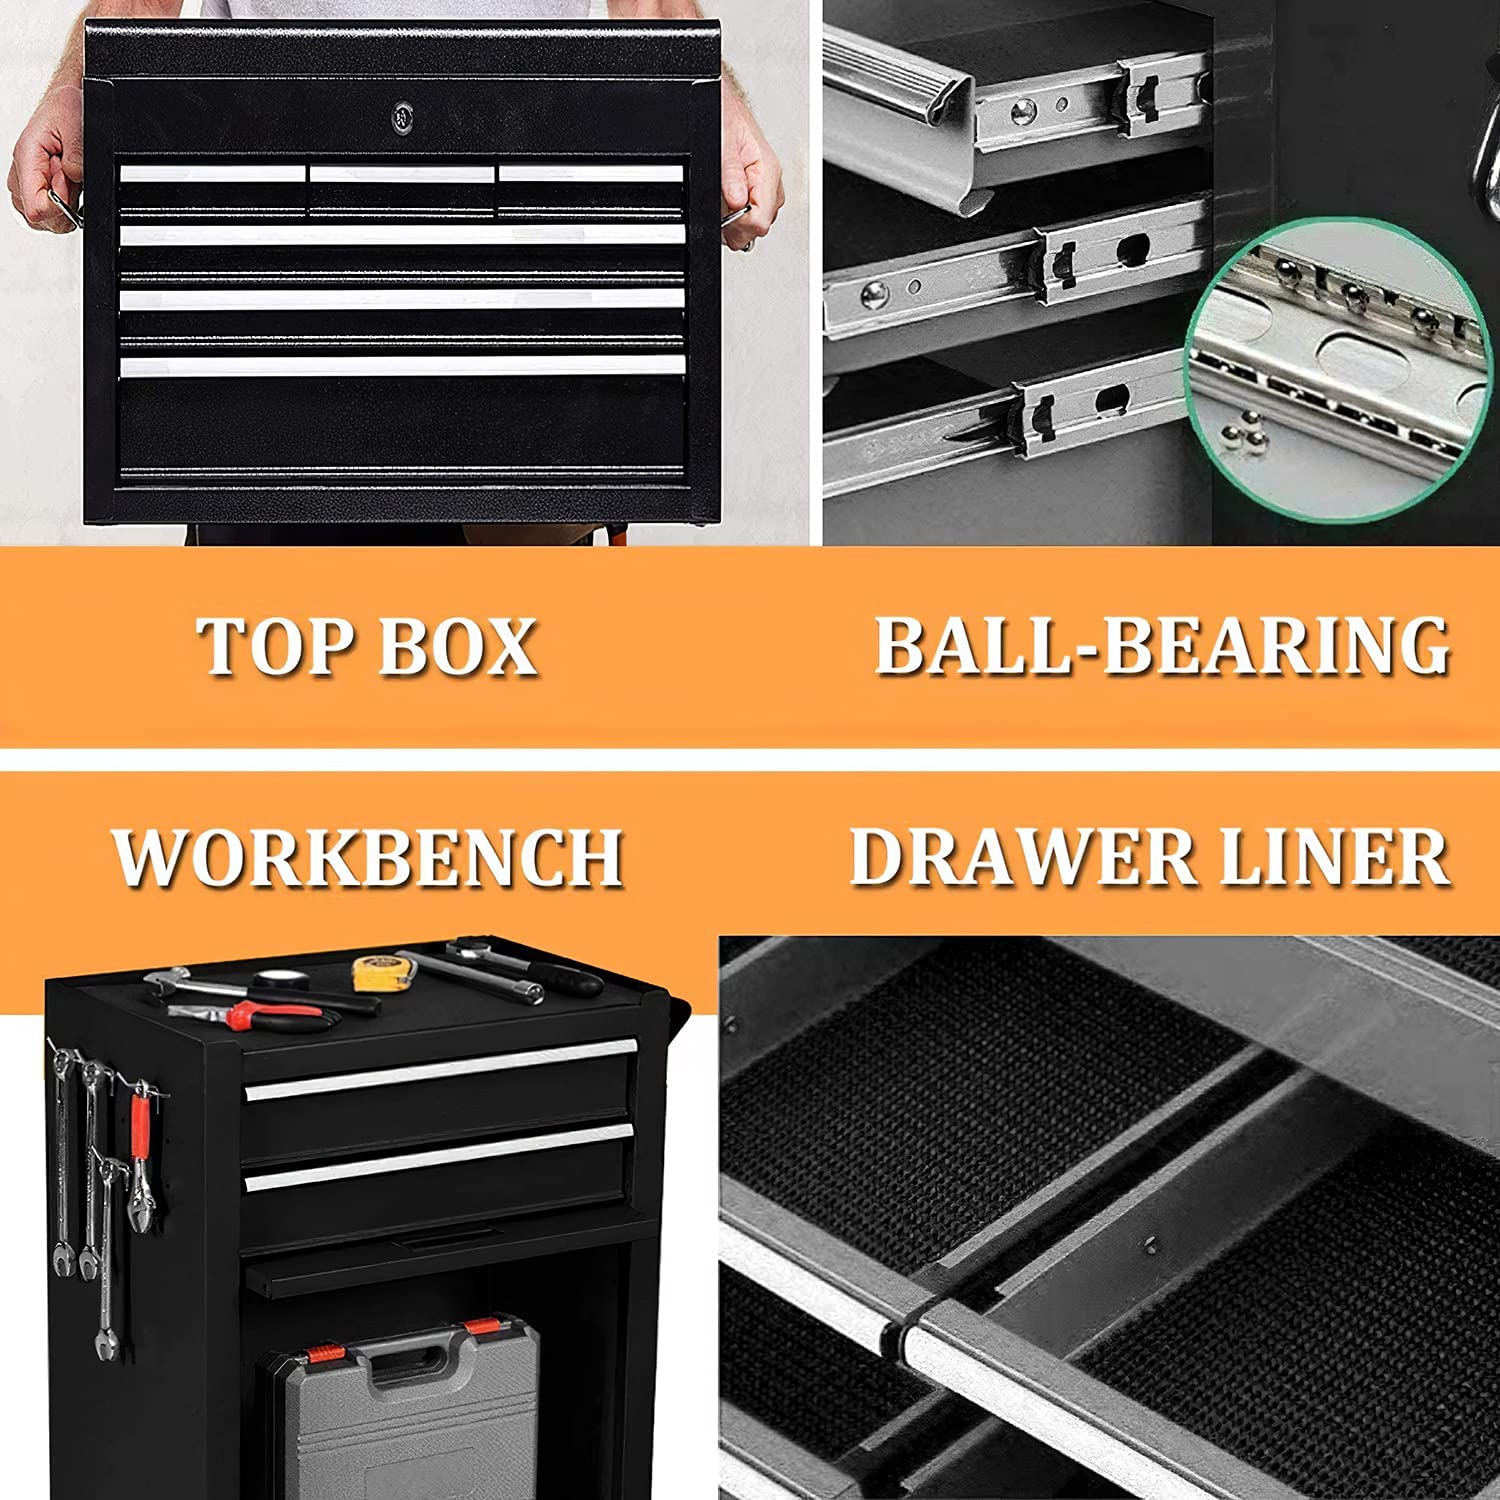 8 Drawer High Capacity Rolling Tool Chest, Large Removable Steel Tool Box  with Lockable Drawers and Wheels, 2 in 1 Portable Toolbox Storage Cabinet